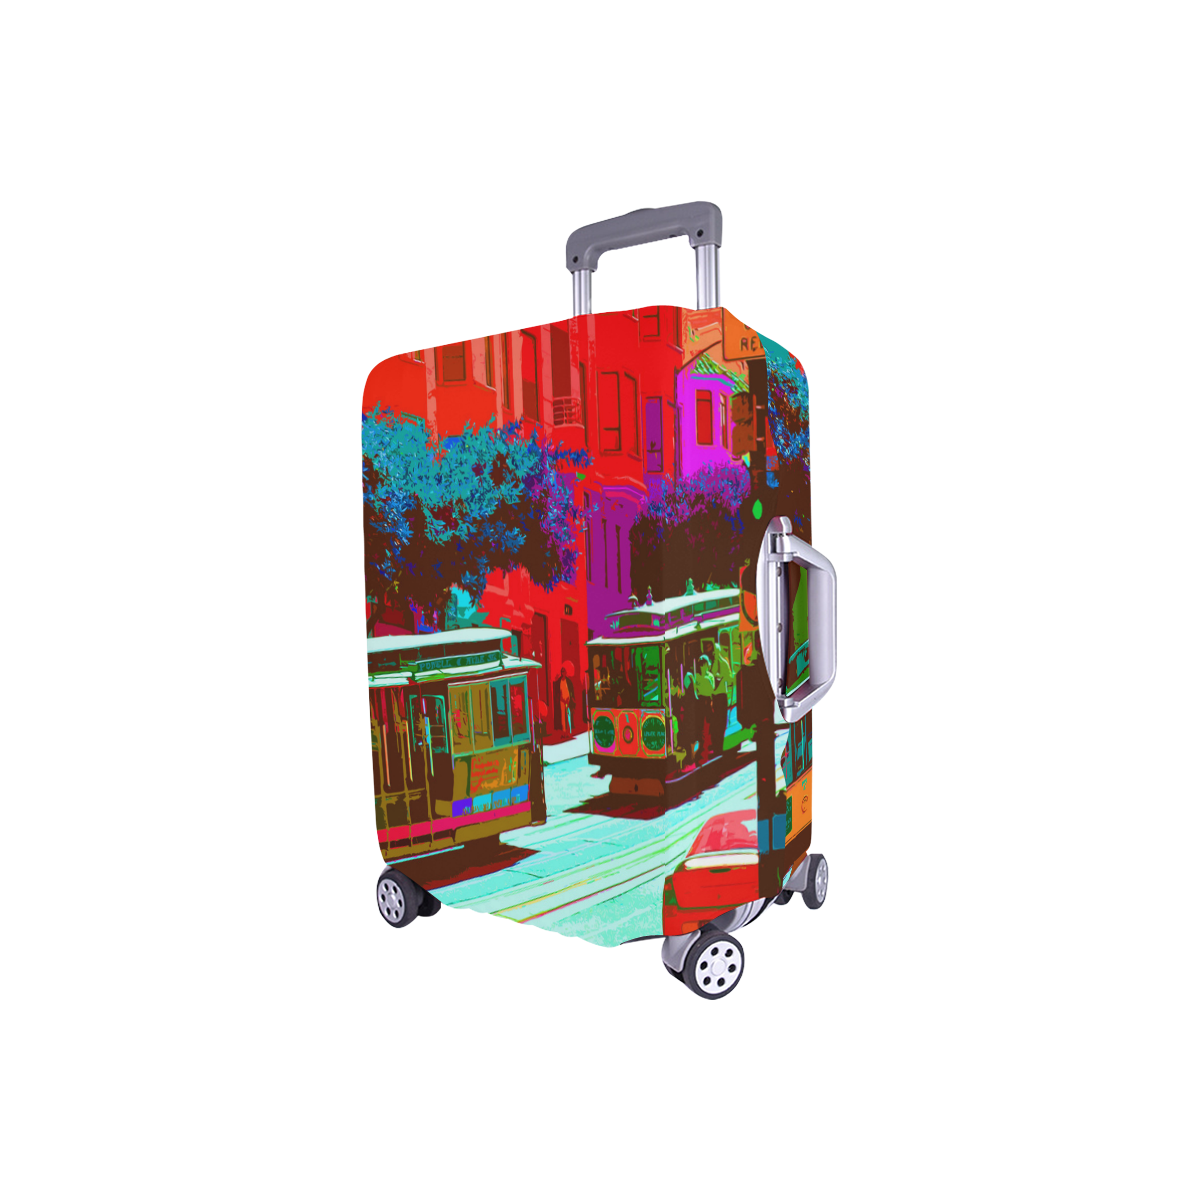 SanFrancisco_20170106_by_JAMColors Luggage Cover/Small 18"-21"